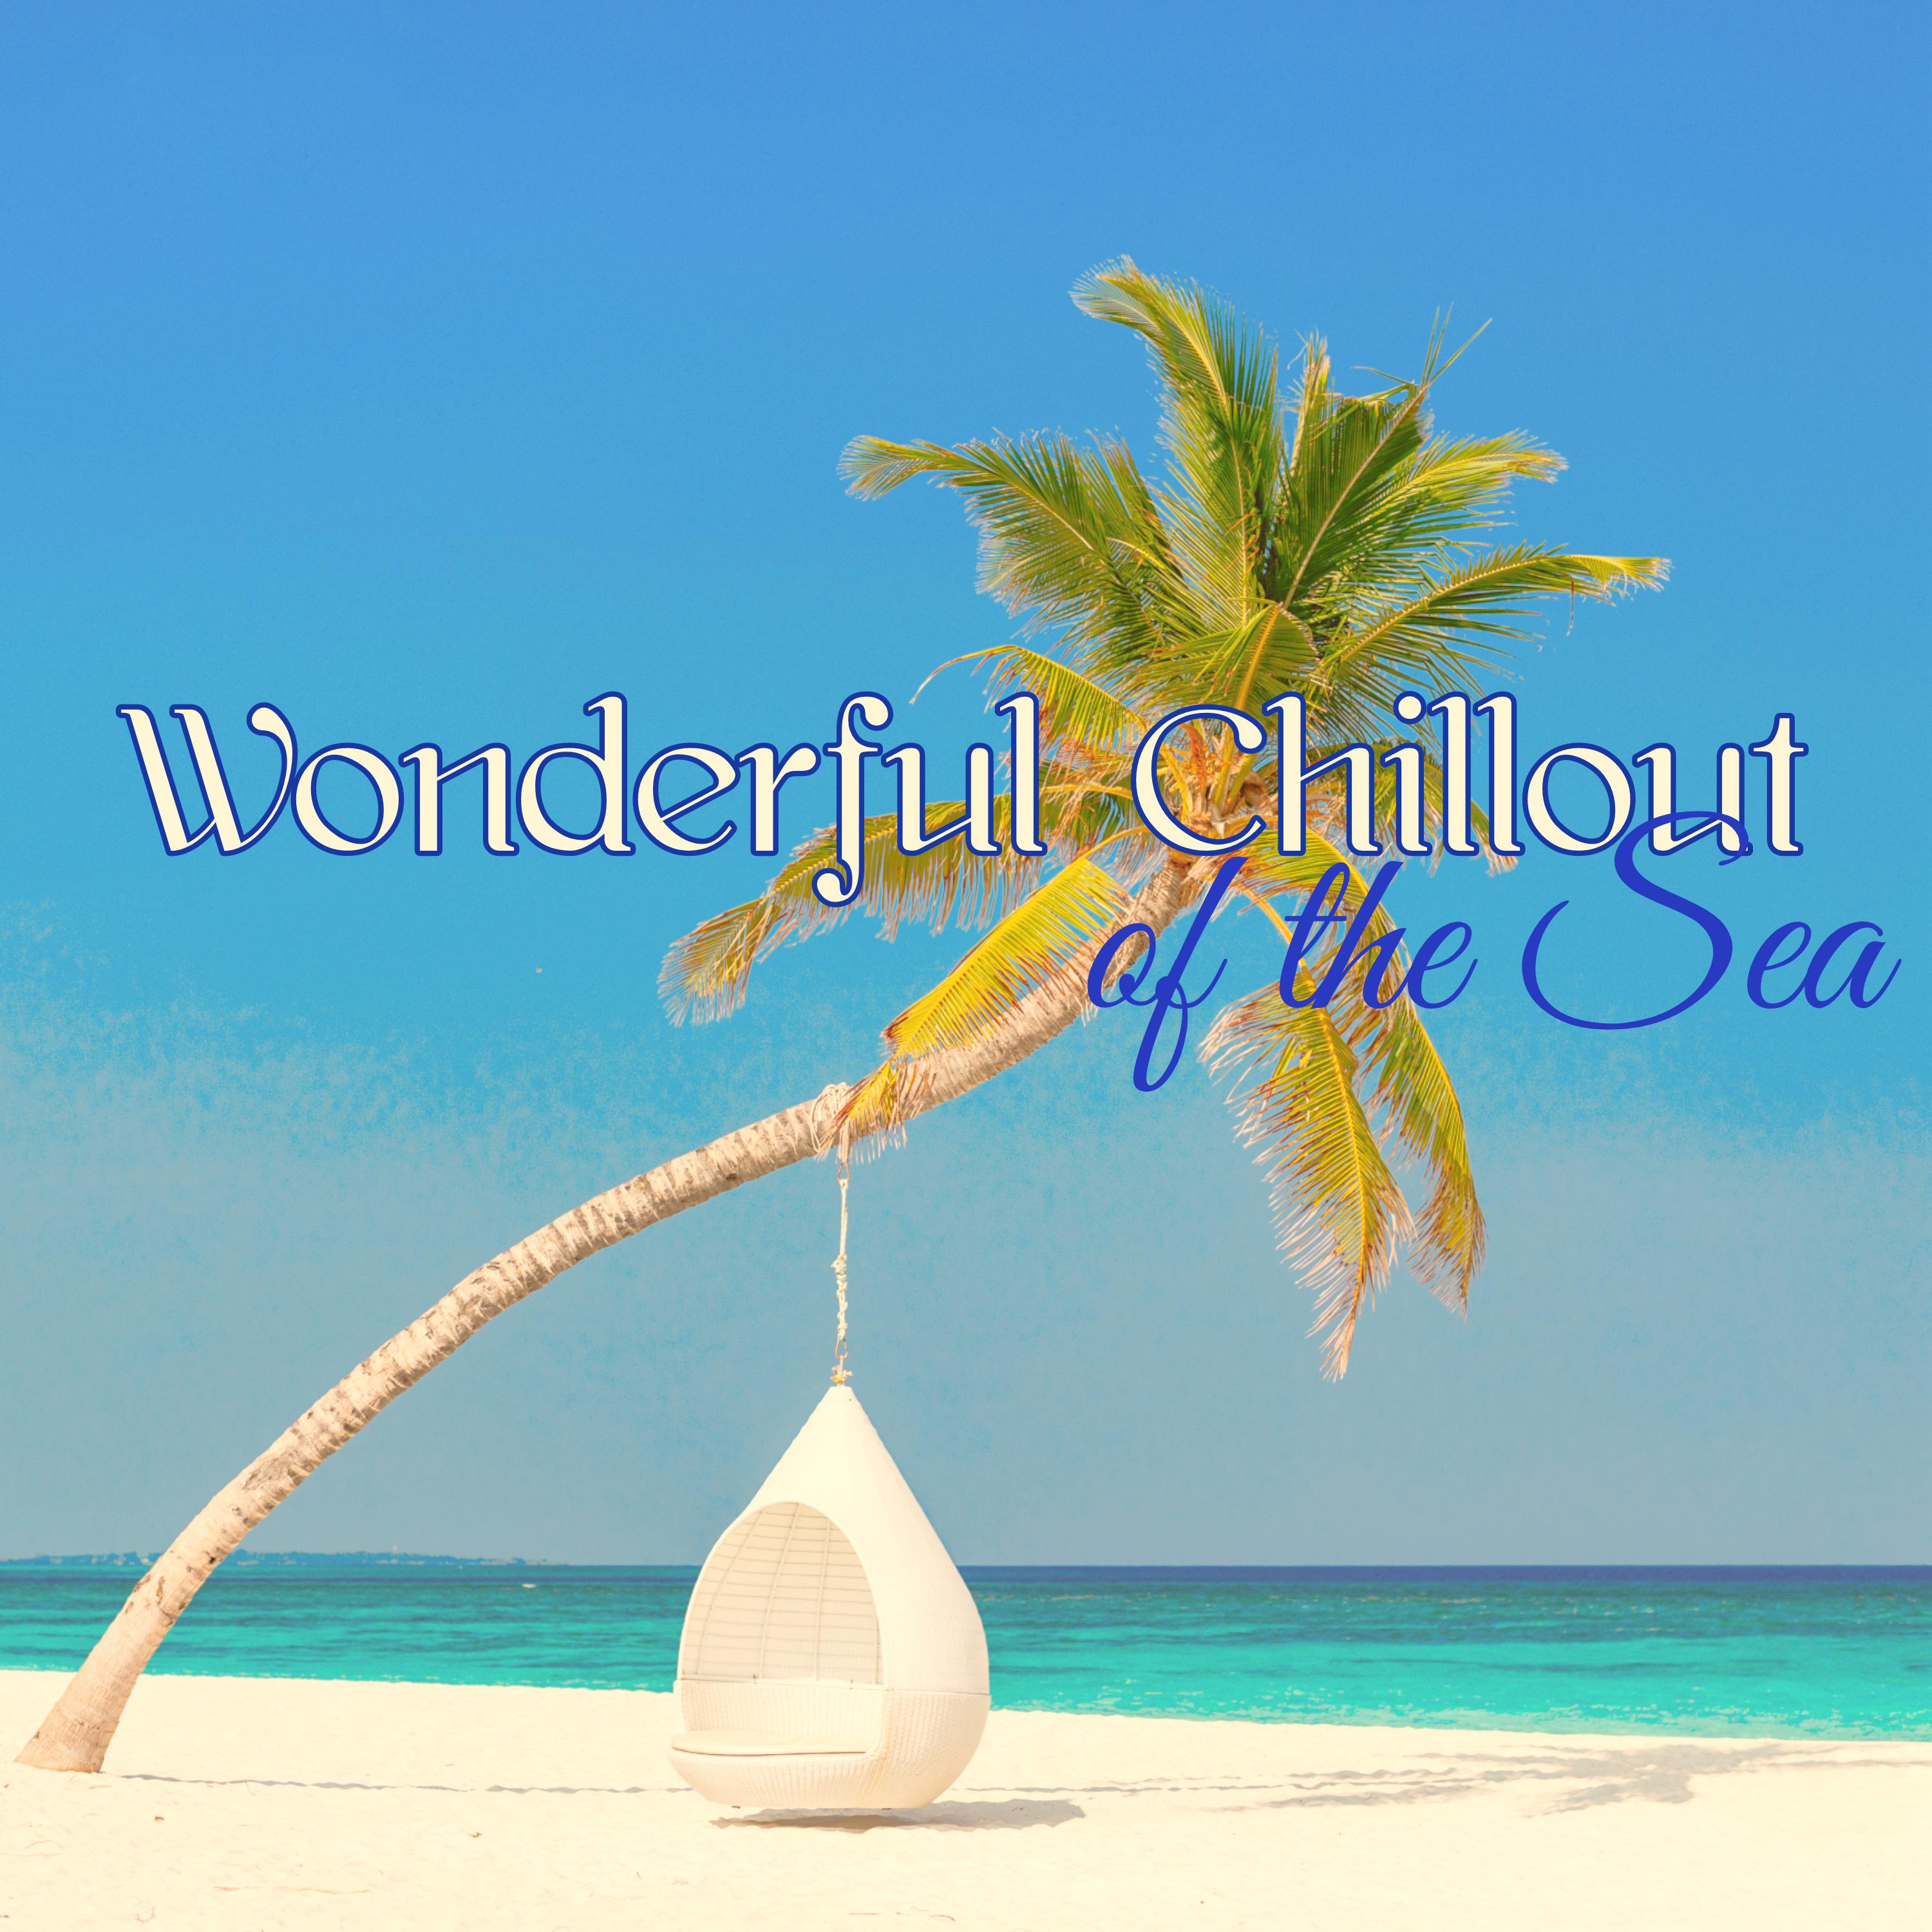 Wonderful Chillout of the Sea  Smooth  Caressing Chill Out by the Sea